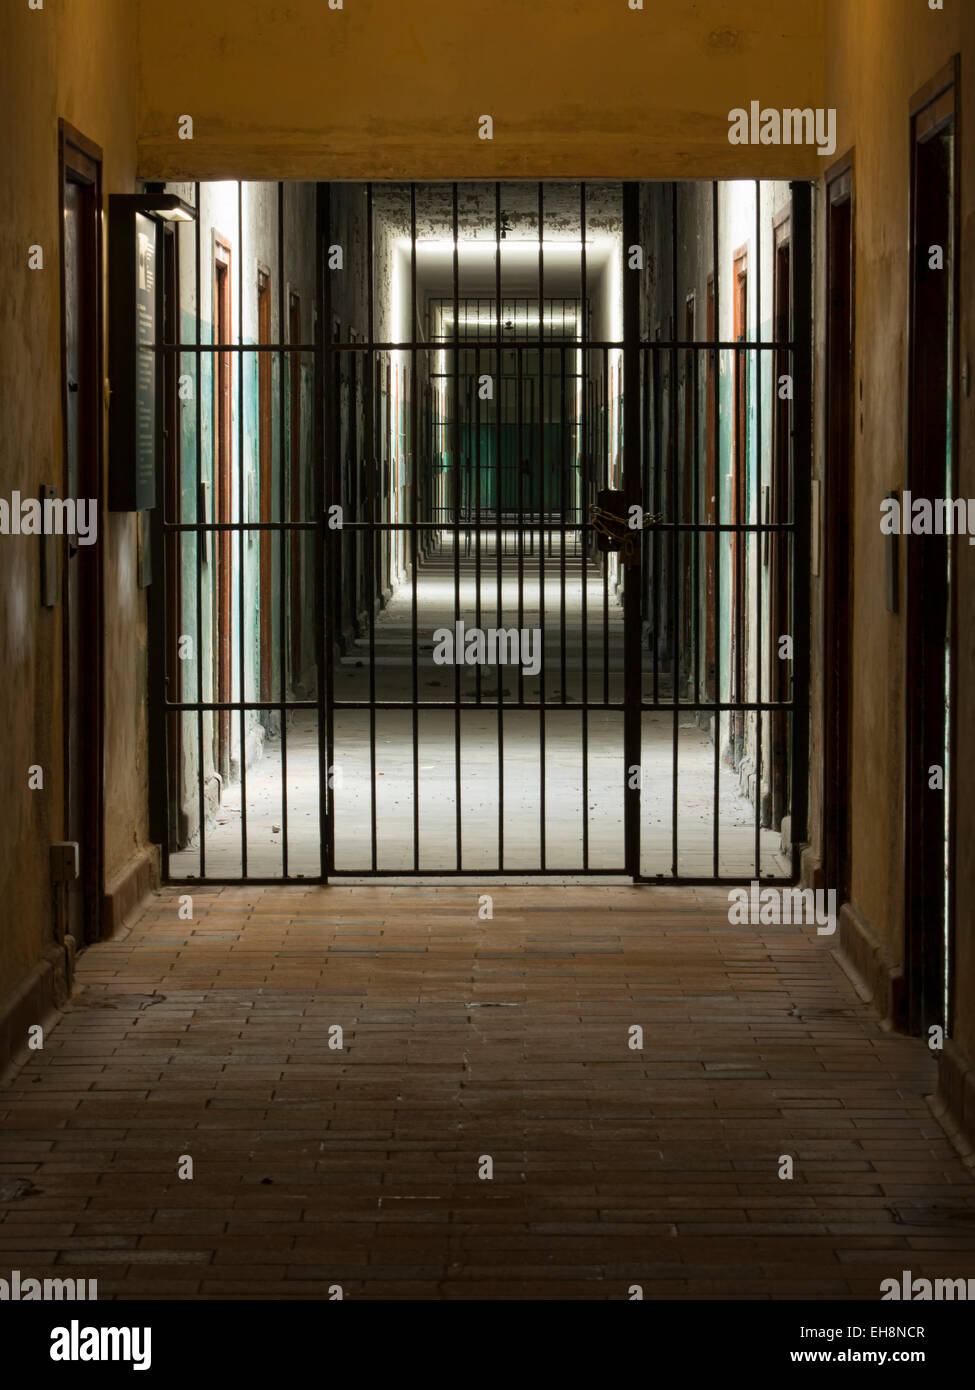 Munich Germany Dachau Concentration Camp bars jail cell Stock Photo